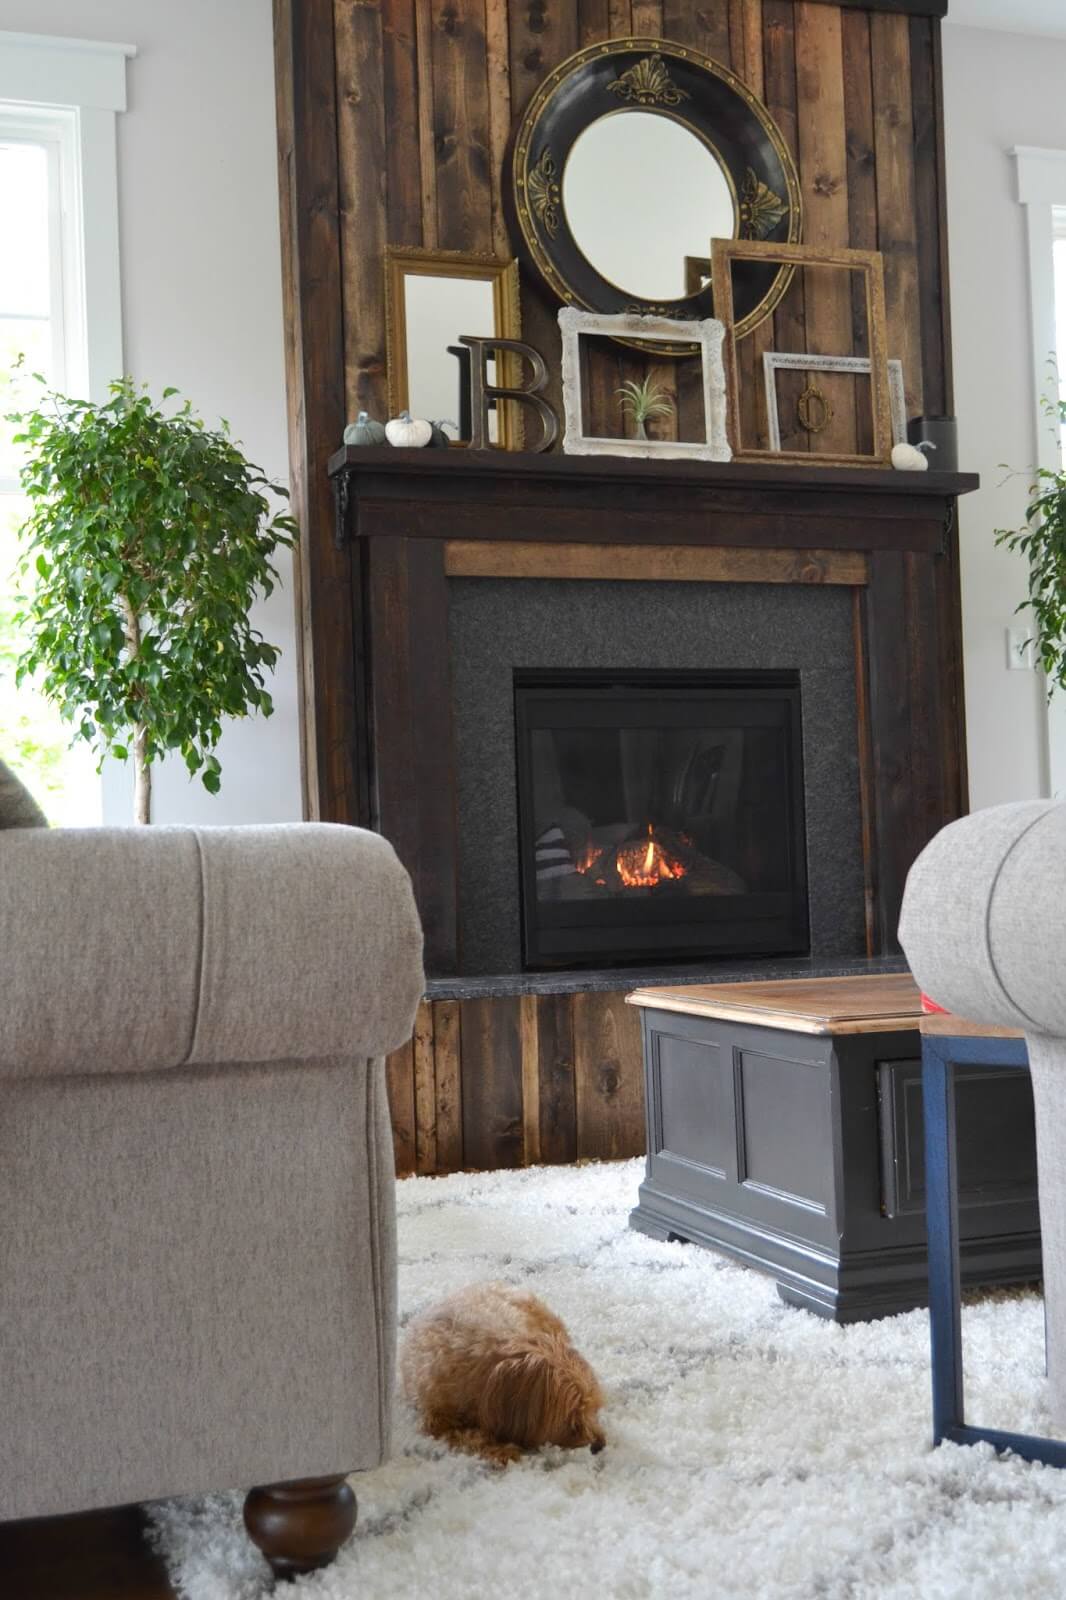 19 Best Fireplace Decor Ideas and Designs for 2020